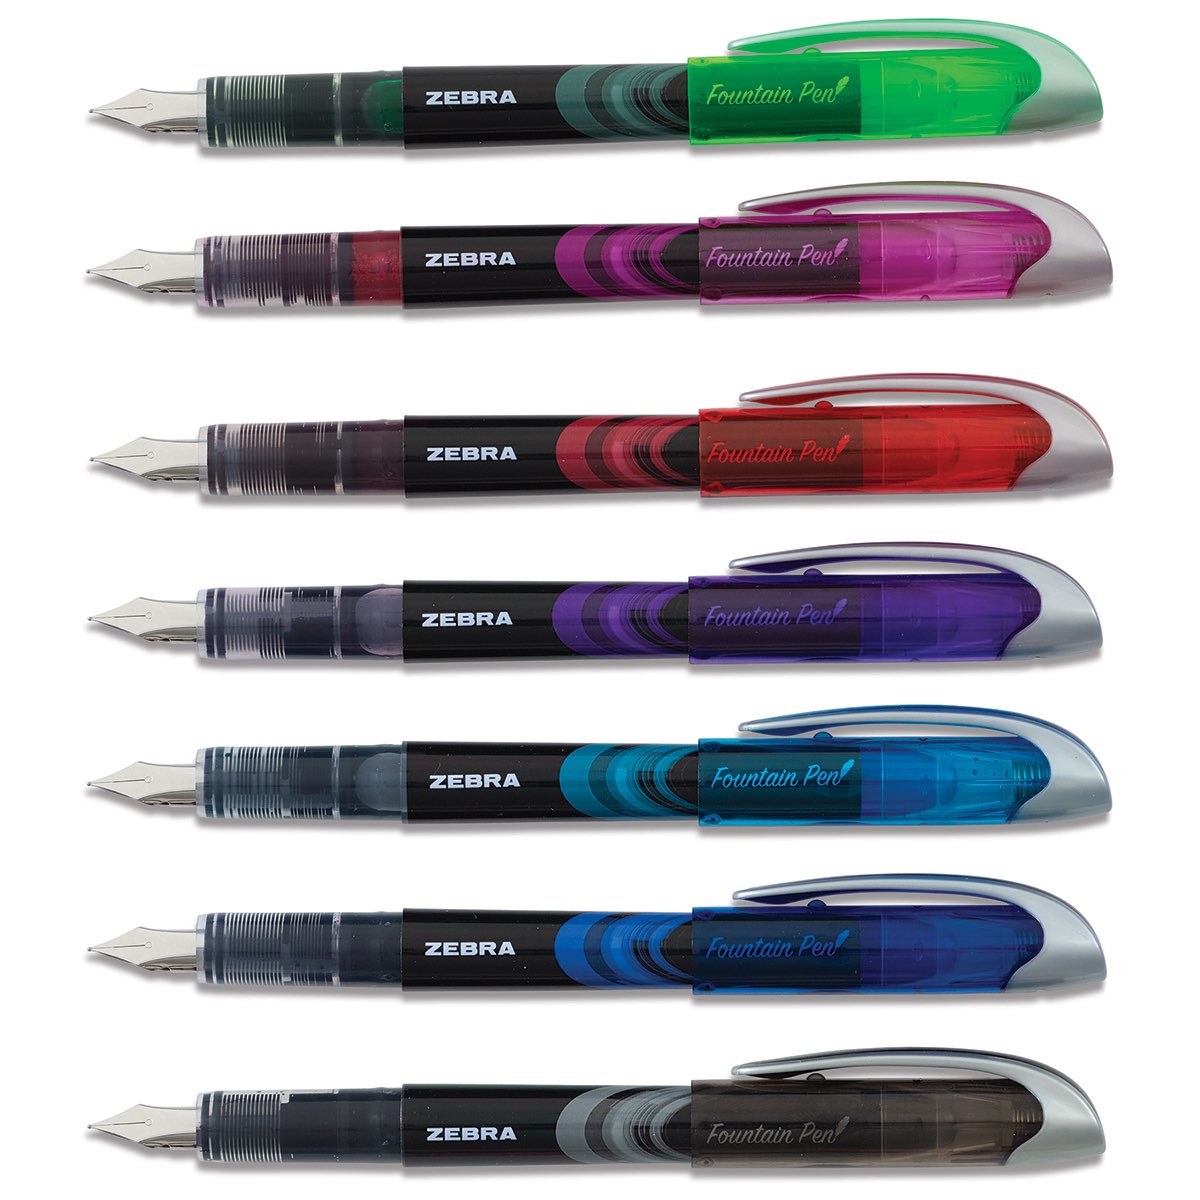 Zebra fountain pen: pretty much the exact same review as the pilot varsity but cheaper. Tbh I didn’t even realize I was using a different brand until I looked at them a second time. Again, will be stolen due to how fancy the fountain tip looks (but writes like a normal pen) 7/10